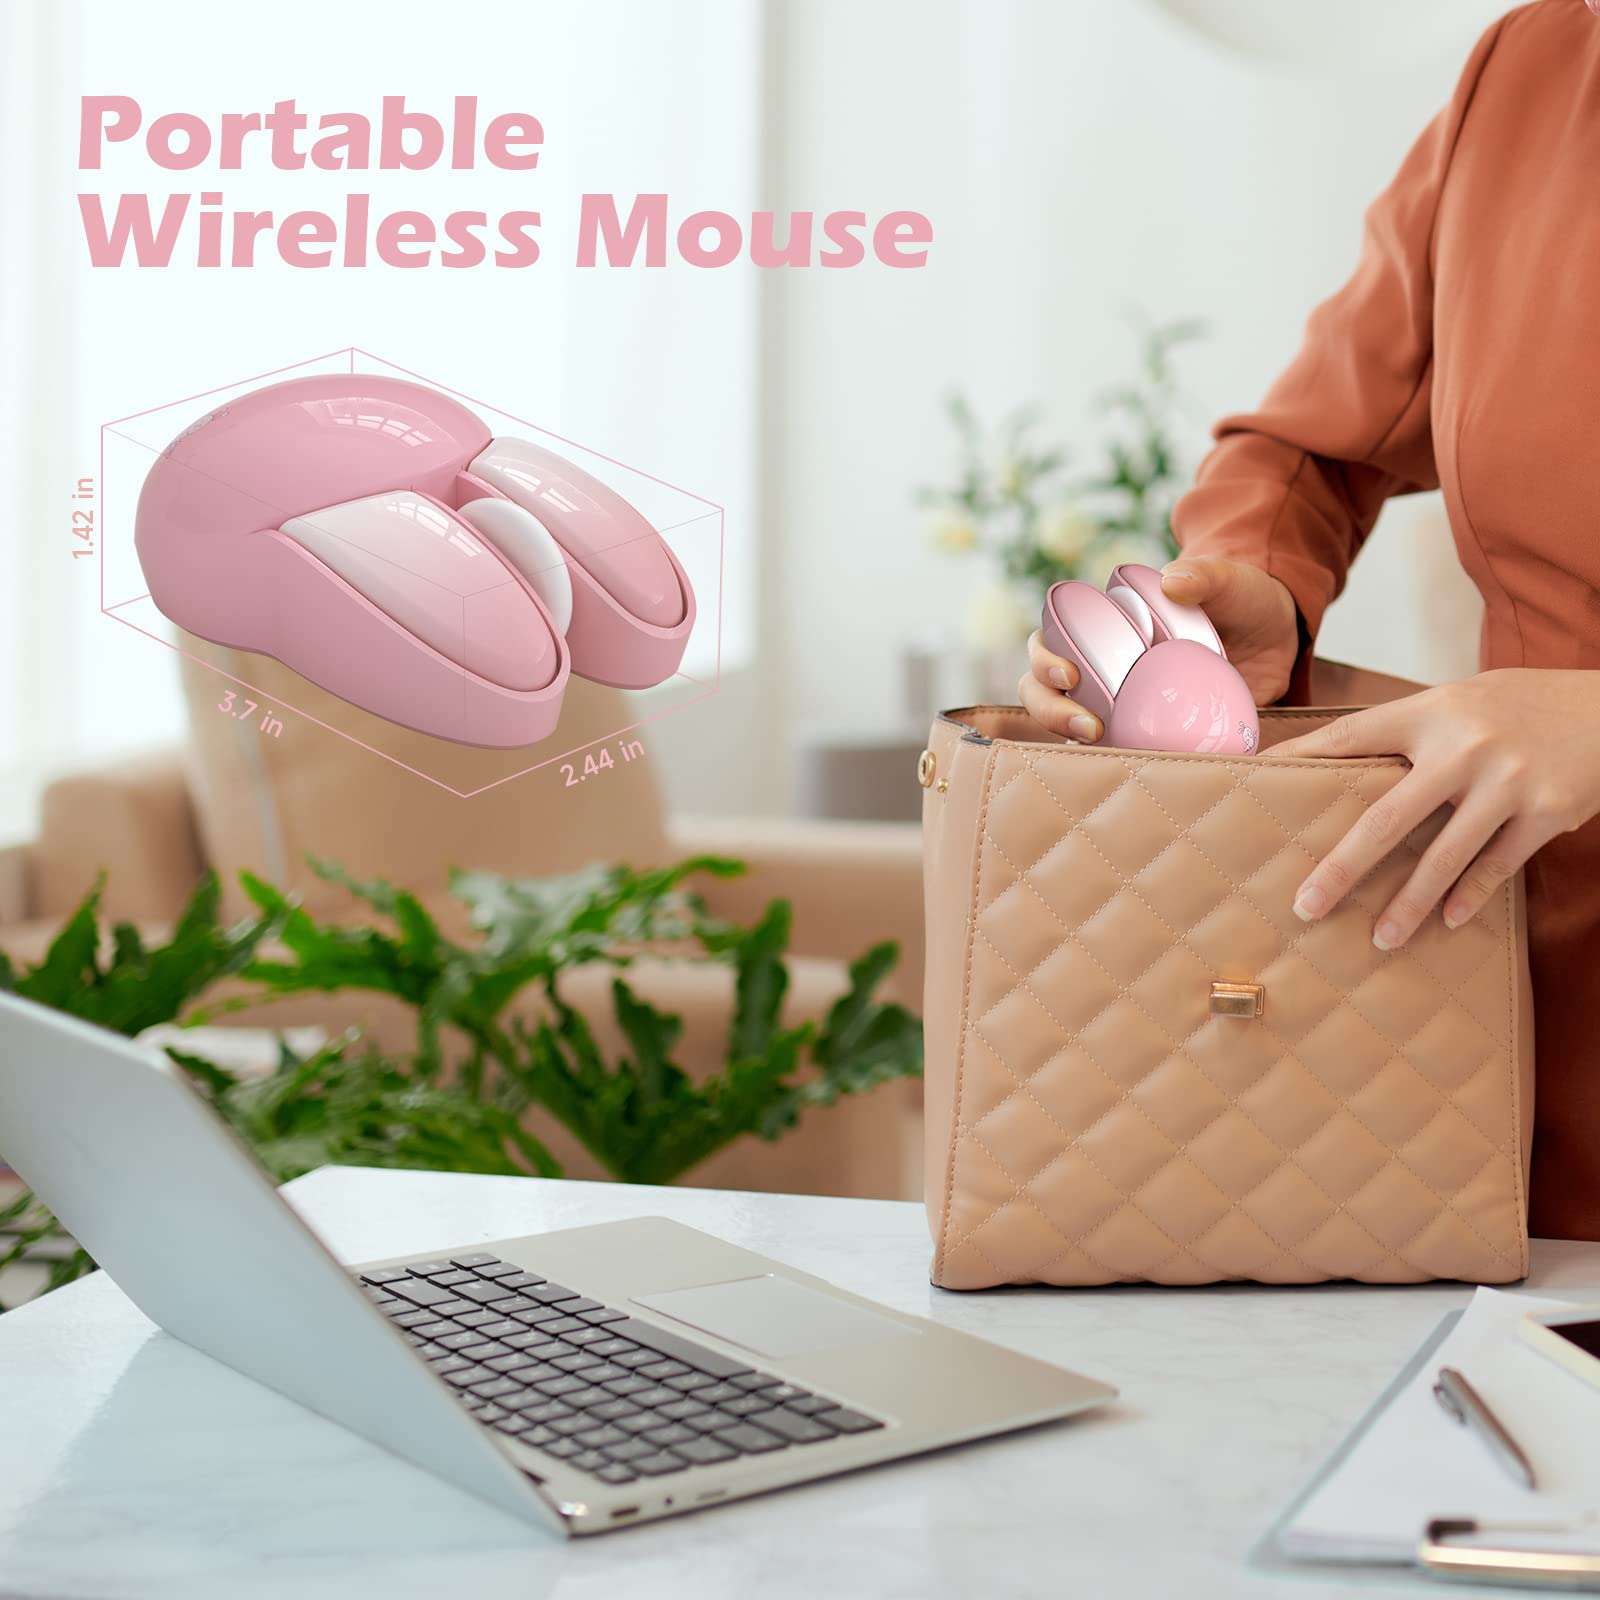 KNOWSQT Bunny Wireless Mouse Pink, 2.4G Silent Rabbit Mice with USB Receiver - for Windows Laptop PC Mac Desktop Gaming